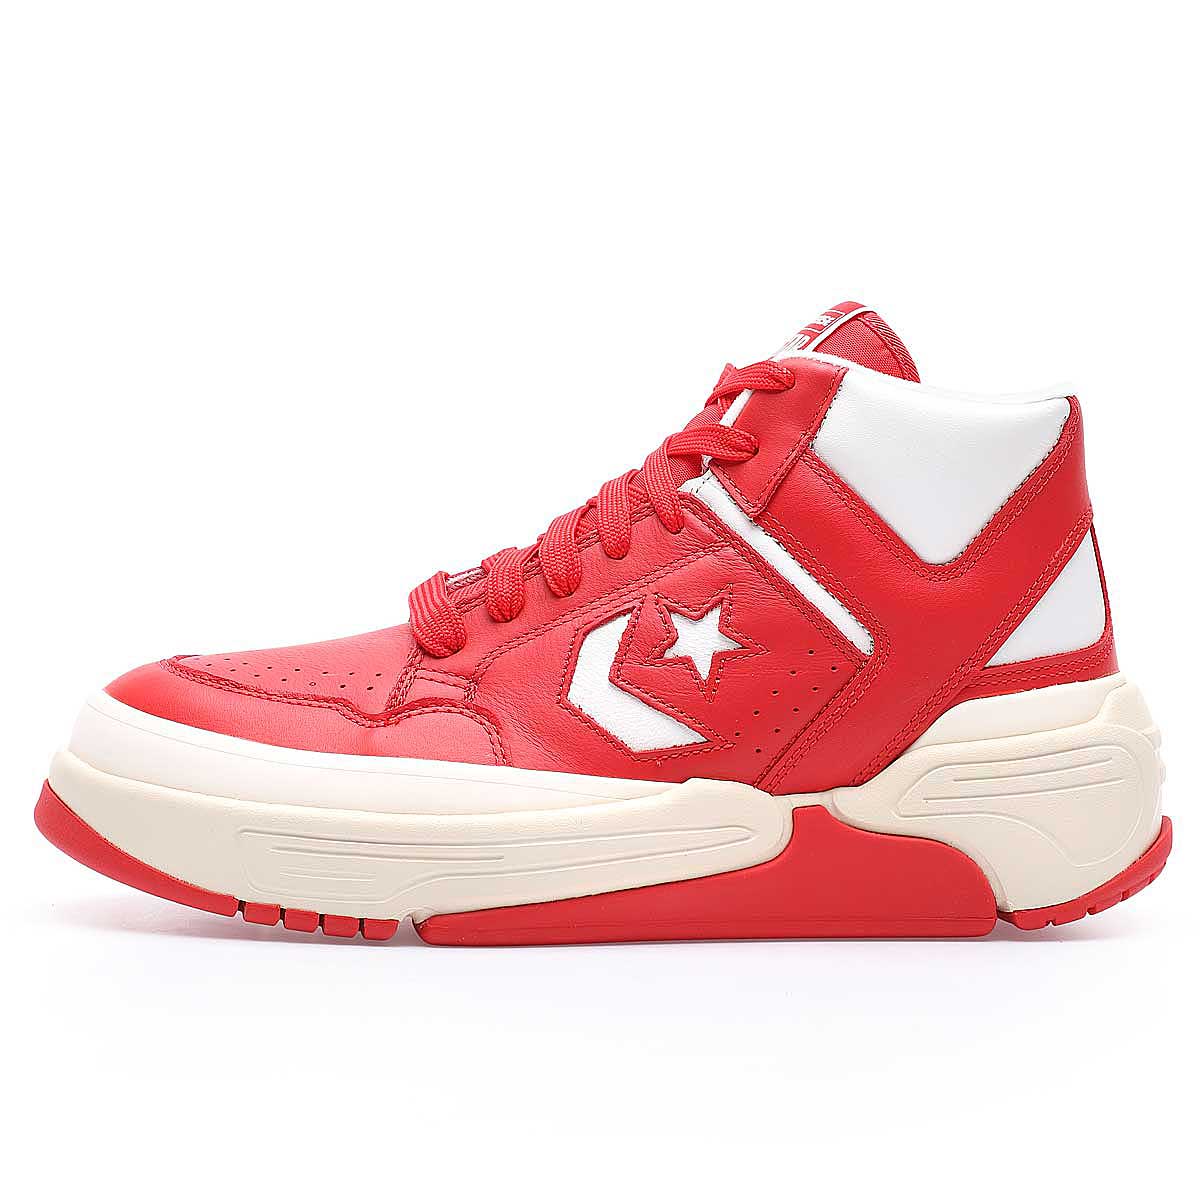 Converse Weapon 110 Mid, University Red/White